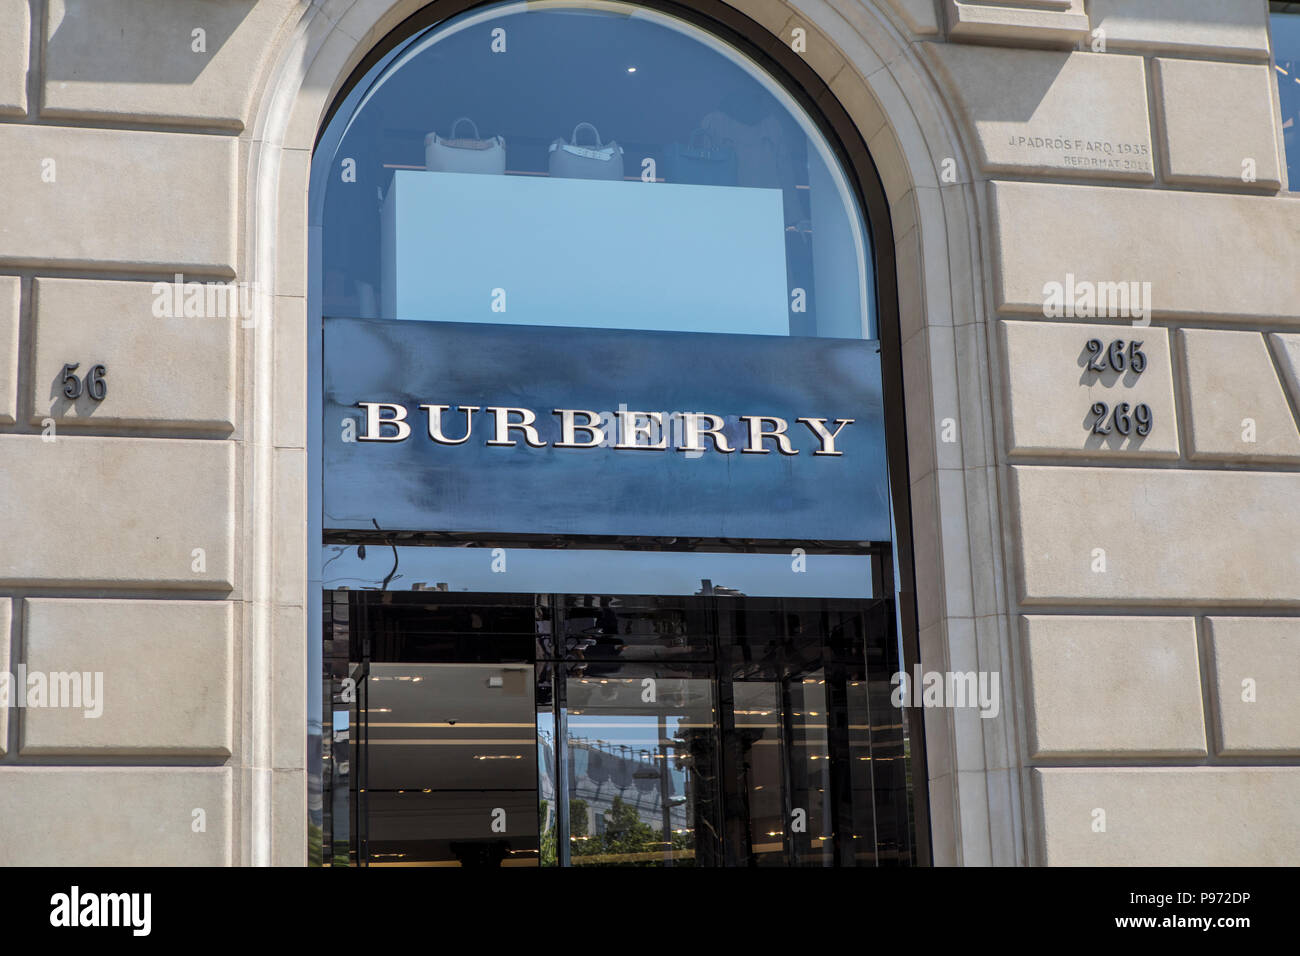 Burberry sign on Passeig de Gràcia street in Barcelona. Barcelona is a city  in Spain. It is the capital and largest city of Catalonia, as well as the  second most populous municipality